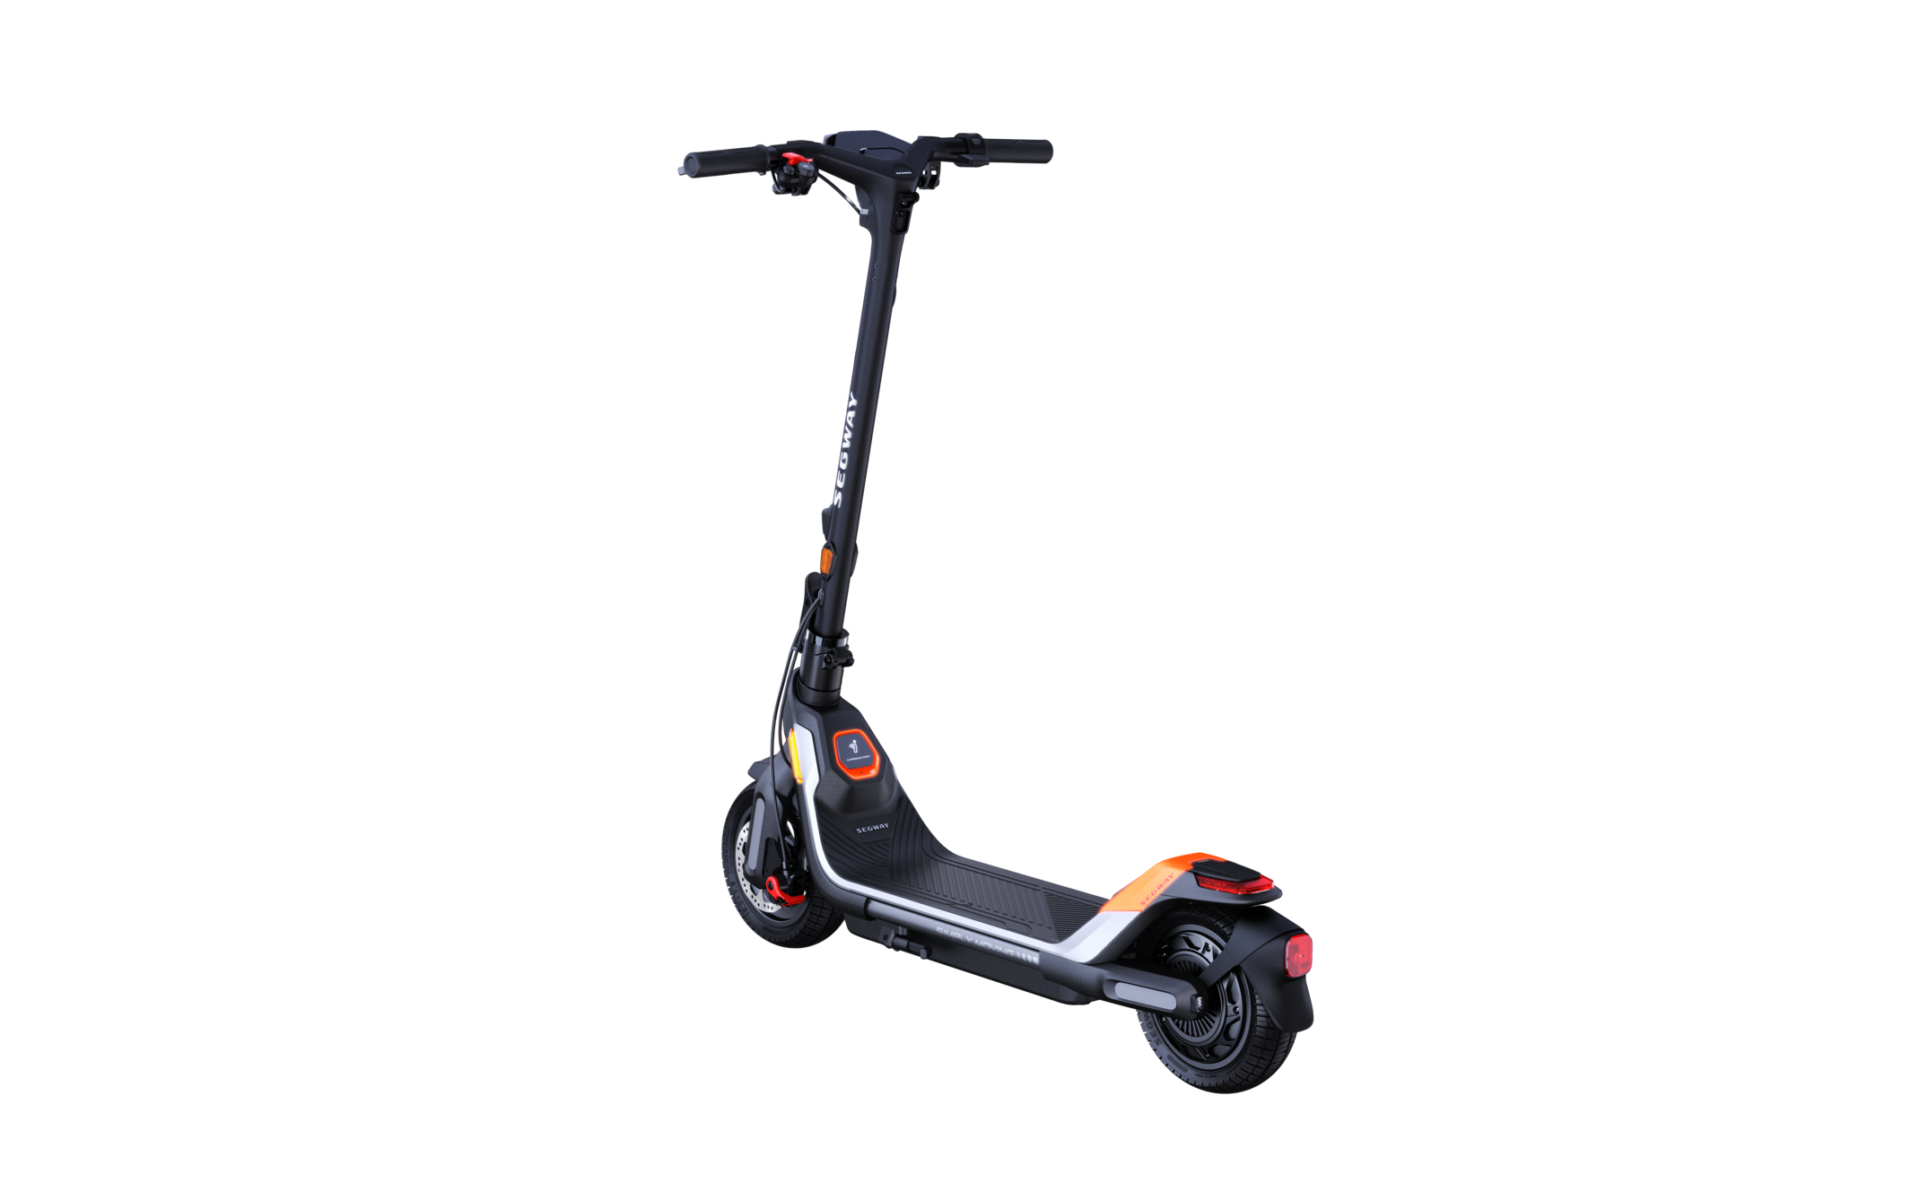 Segway Ninebot Reliable and stylish scooter |